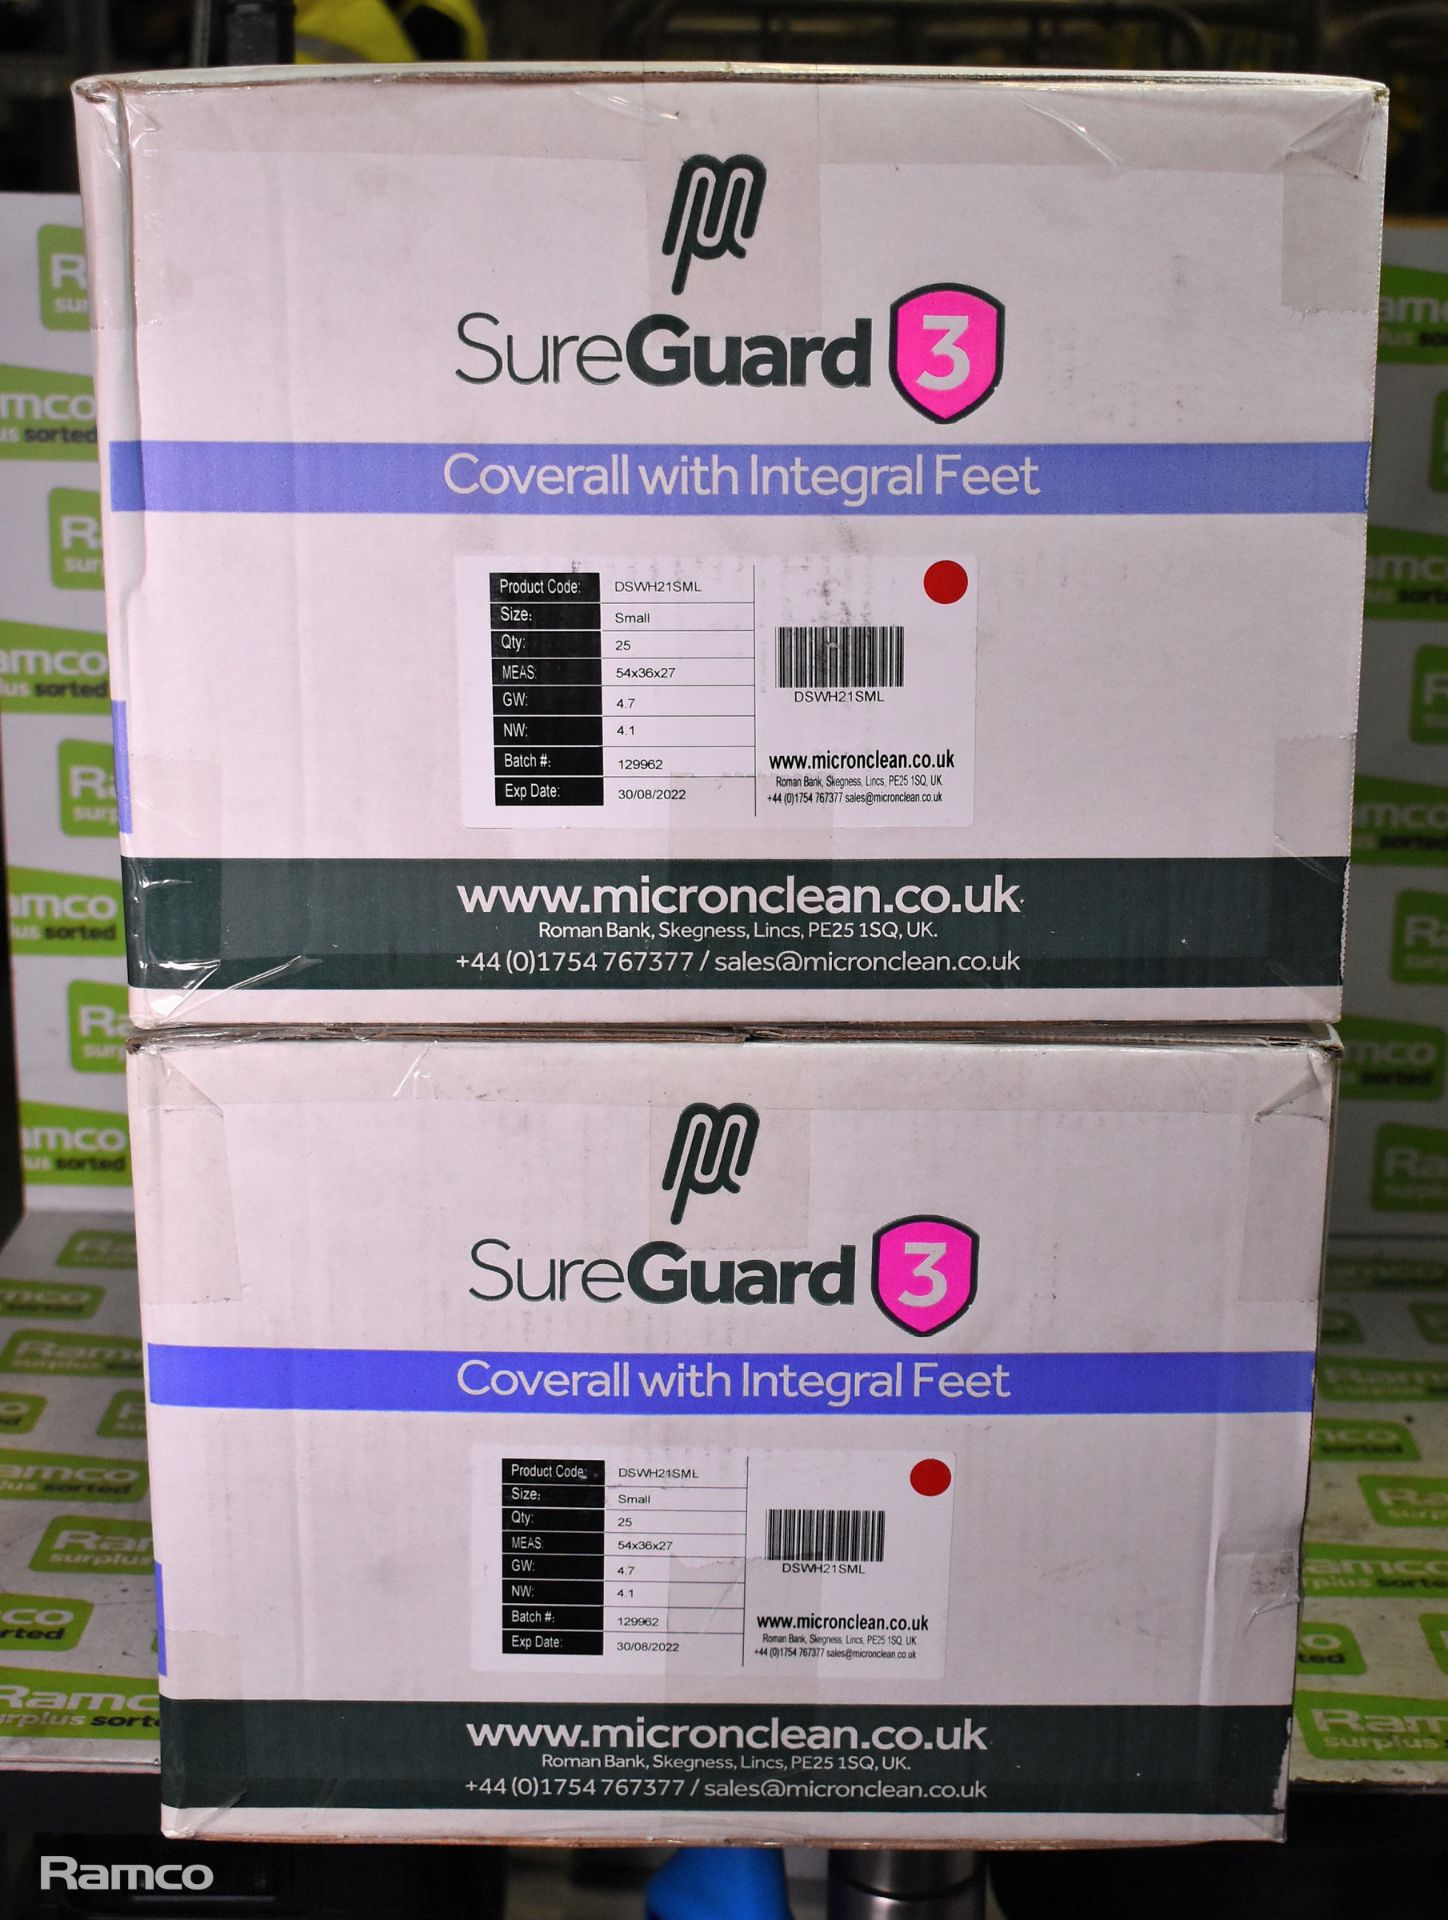 2x boxes of MicroClean SureGuard 3 coveralls - size small with integral feet - 25 units per box - Bild 2 aus 3